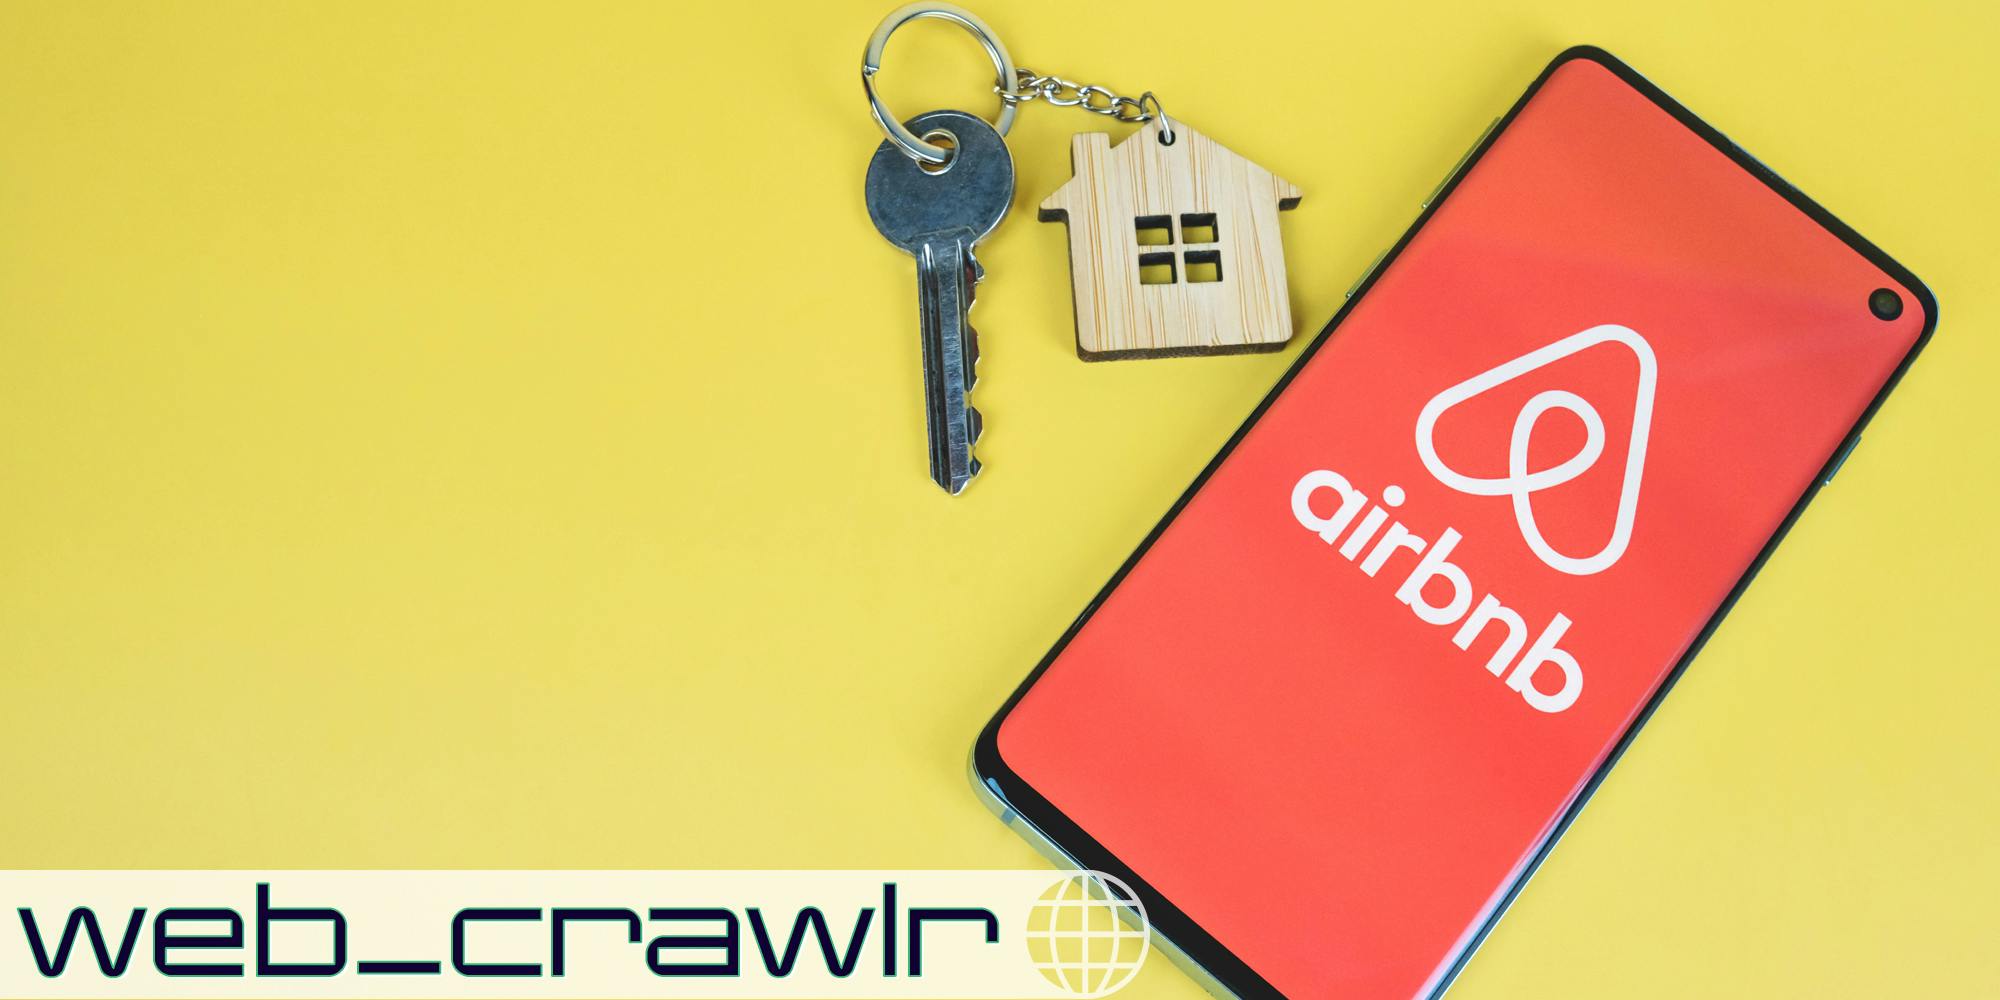 A phone with the Airbnb logo on it next to a set of keys. The Daily Dot newsletter web_crawlr logo is in the bottom left corner.